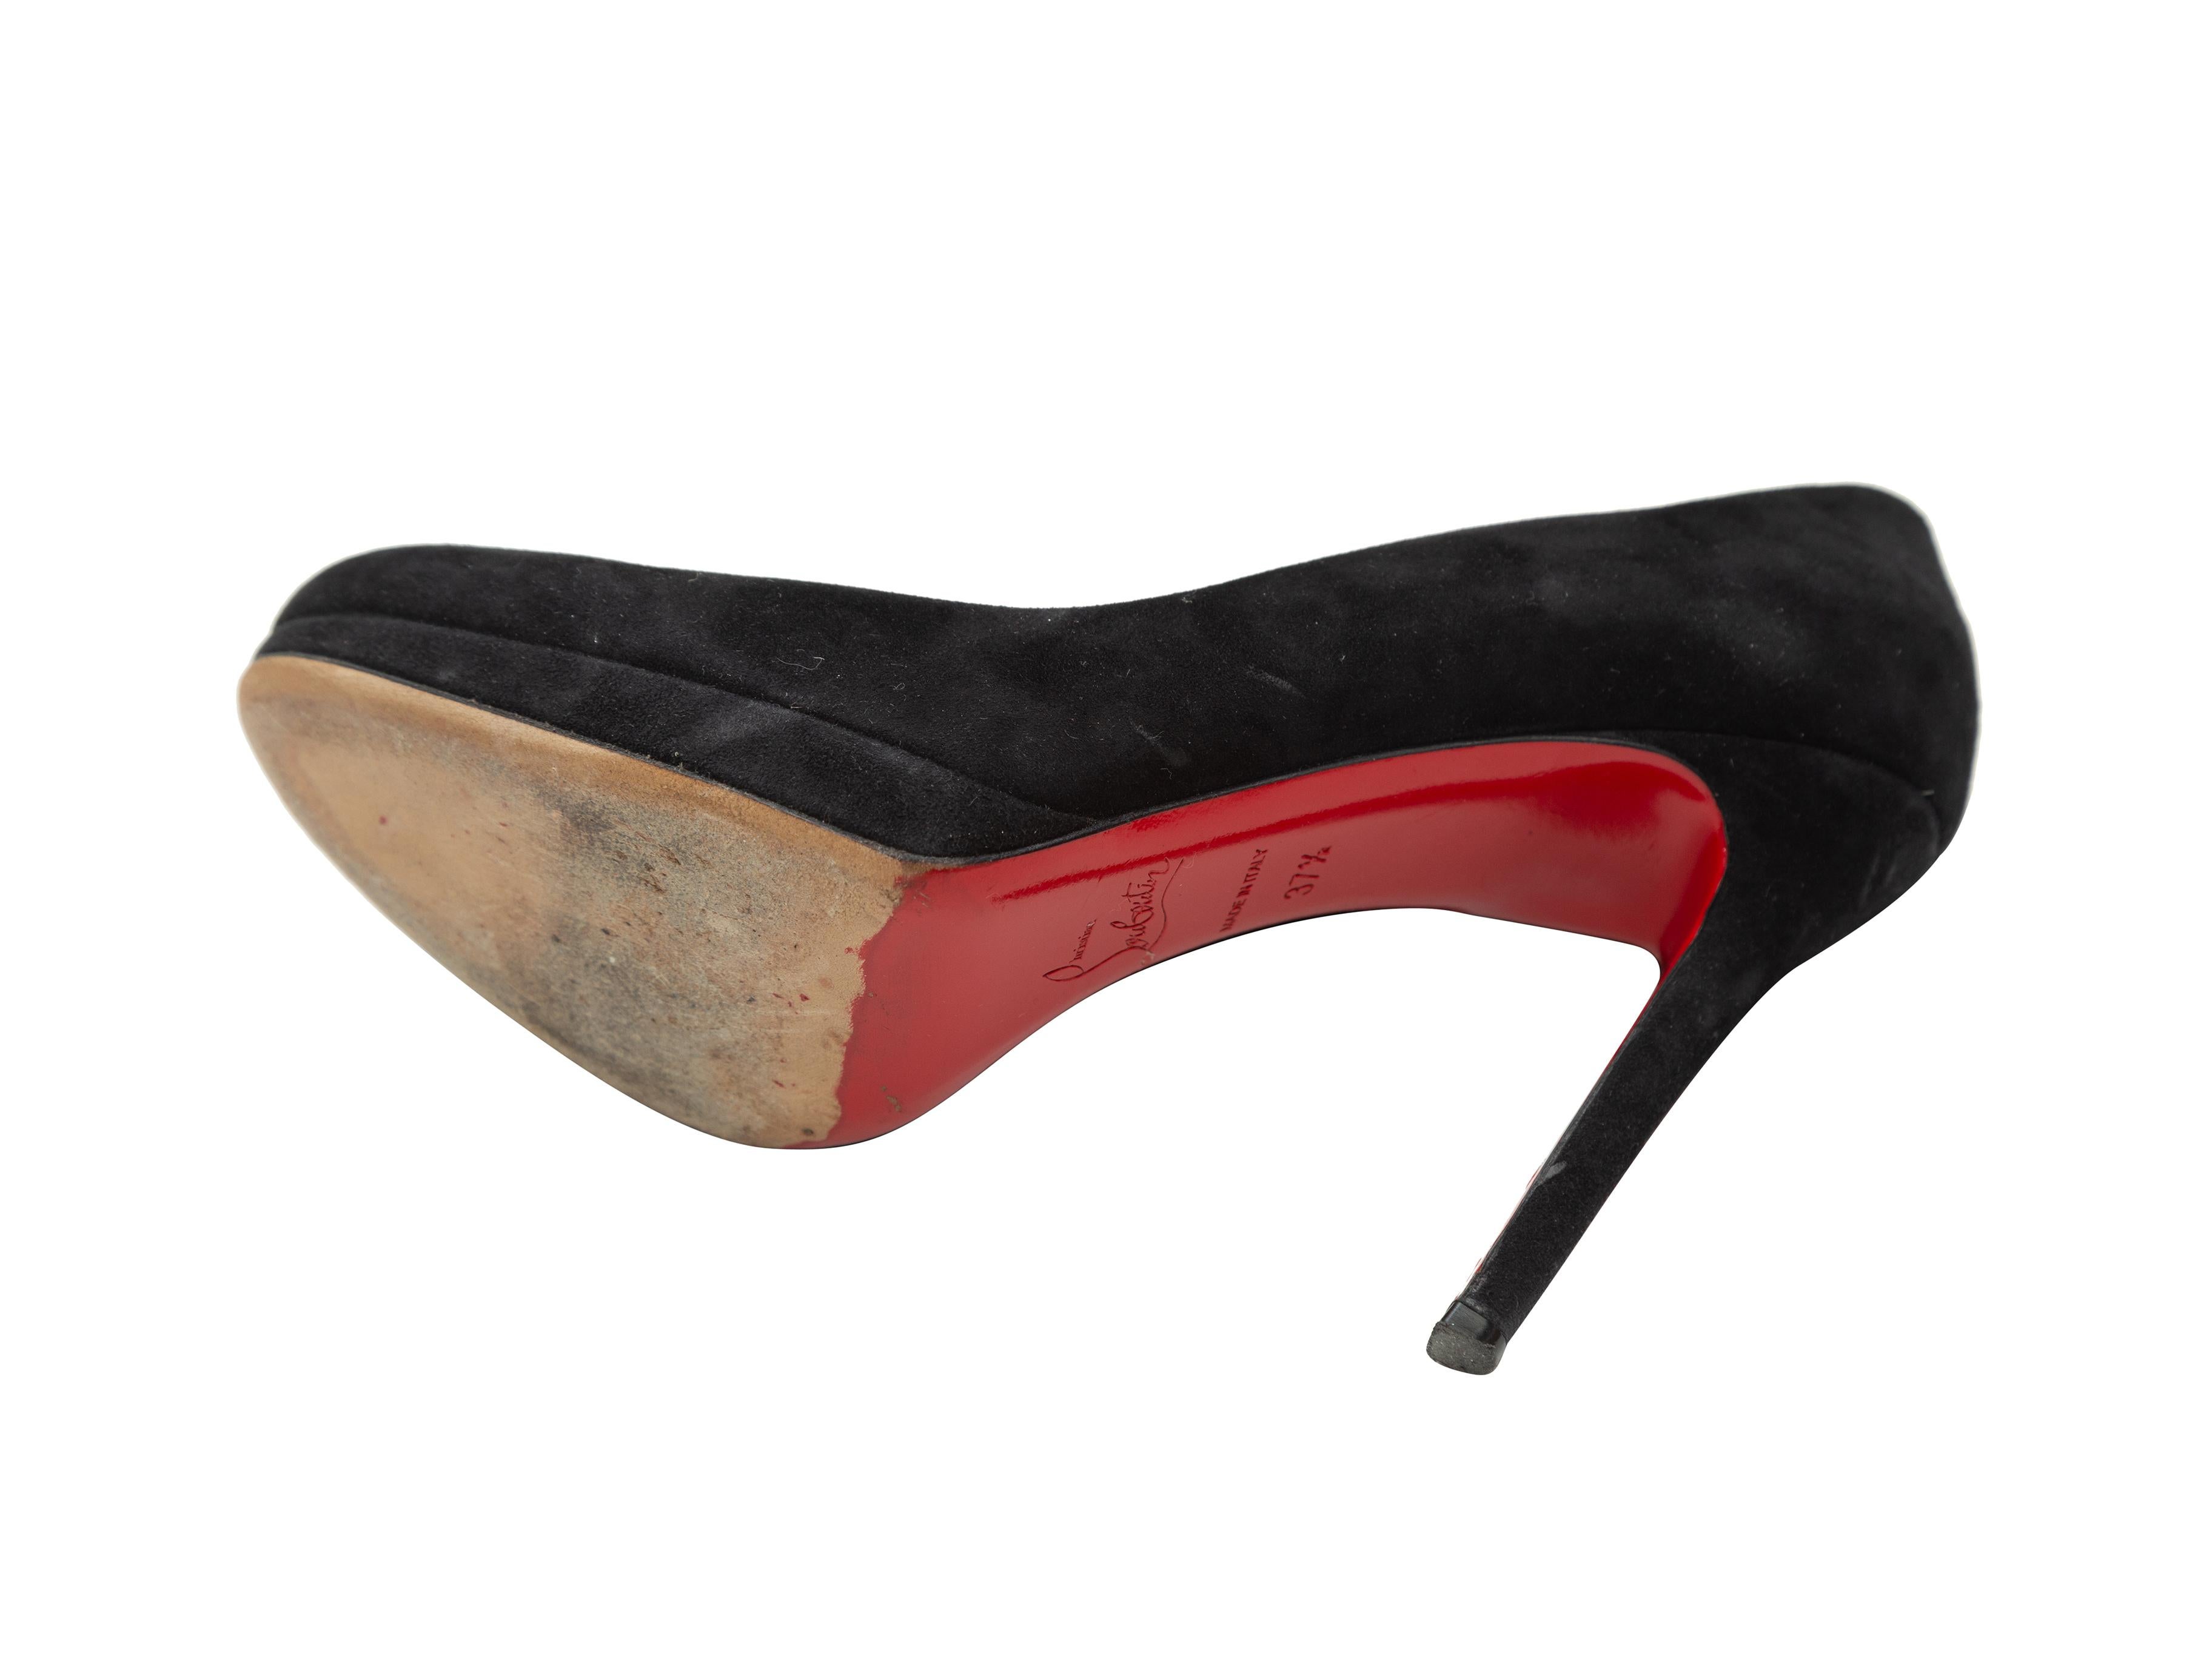 Product details: Black suede round-toe pumps by Christian Louboutin. Designer size 37.5. 4.5